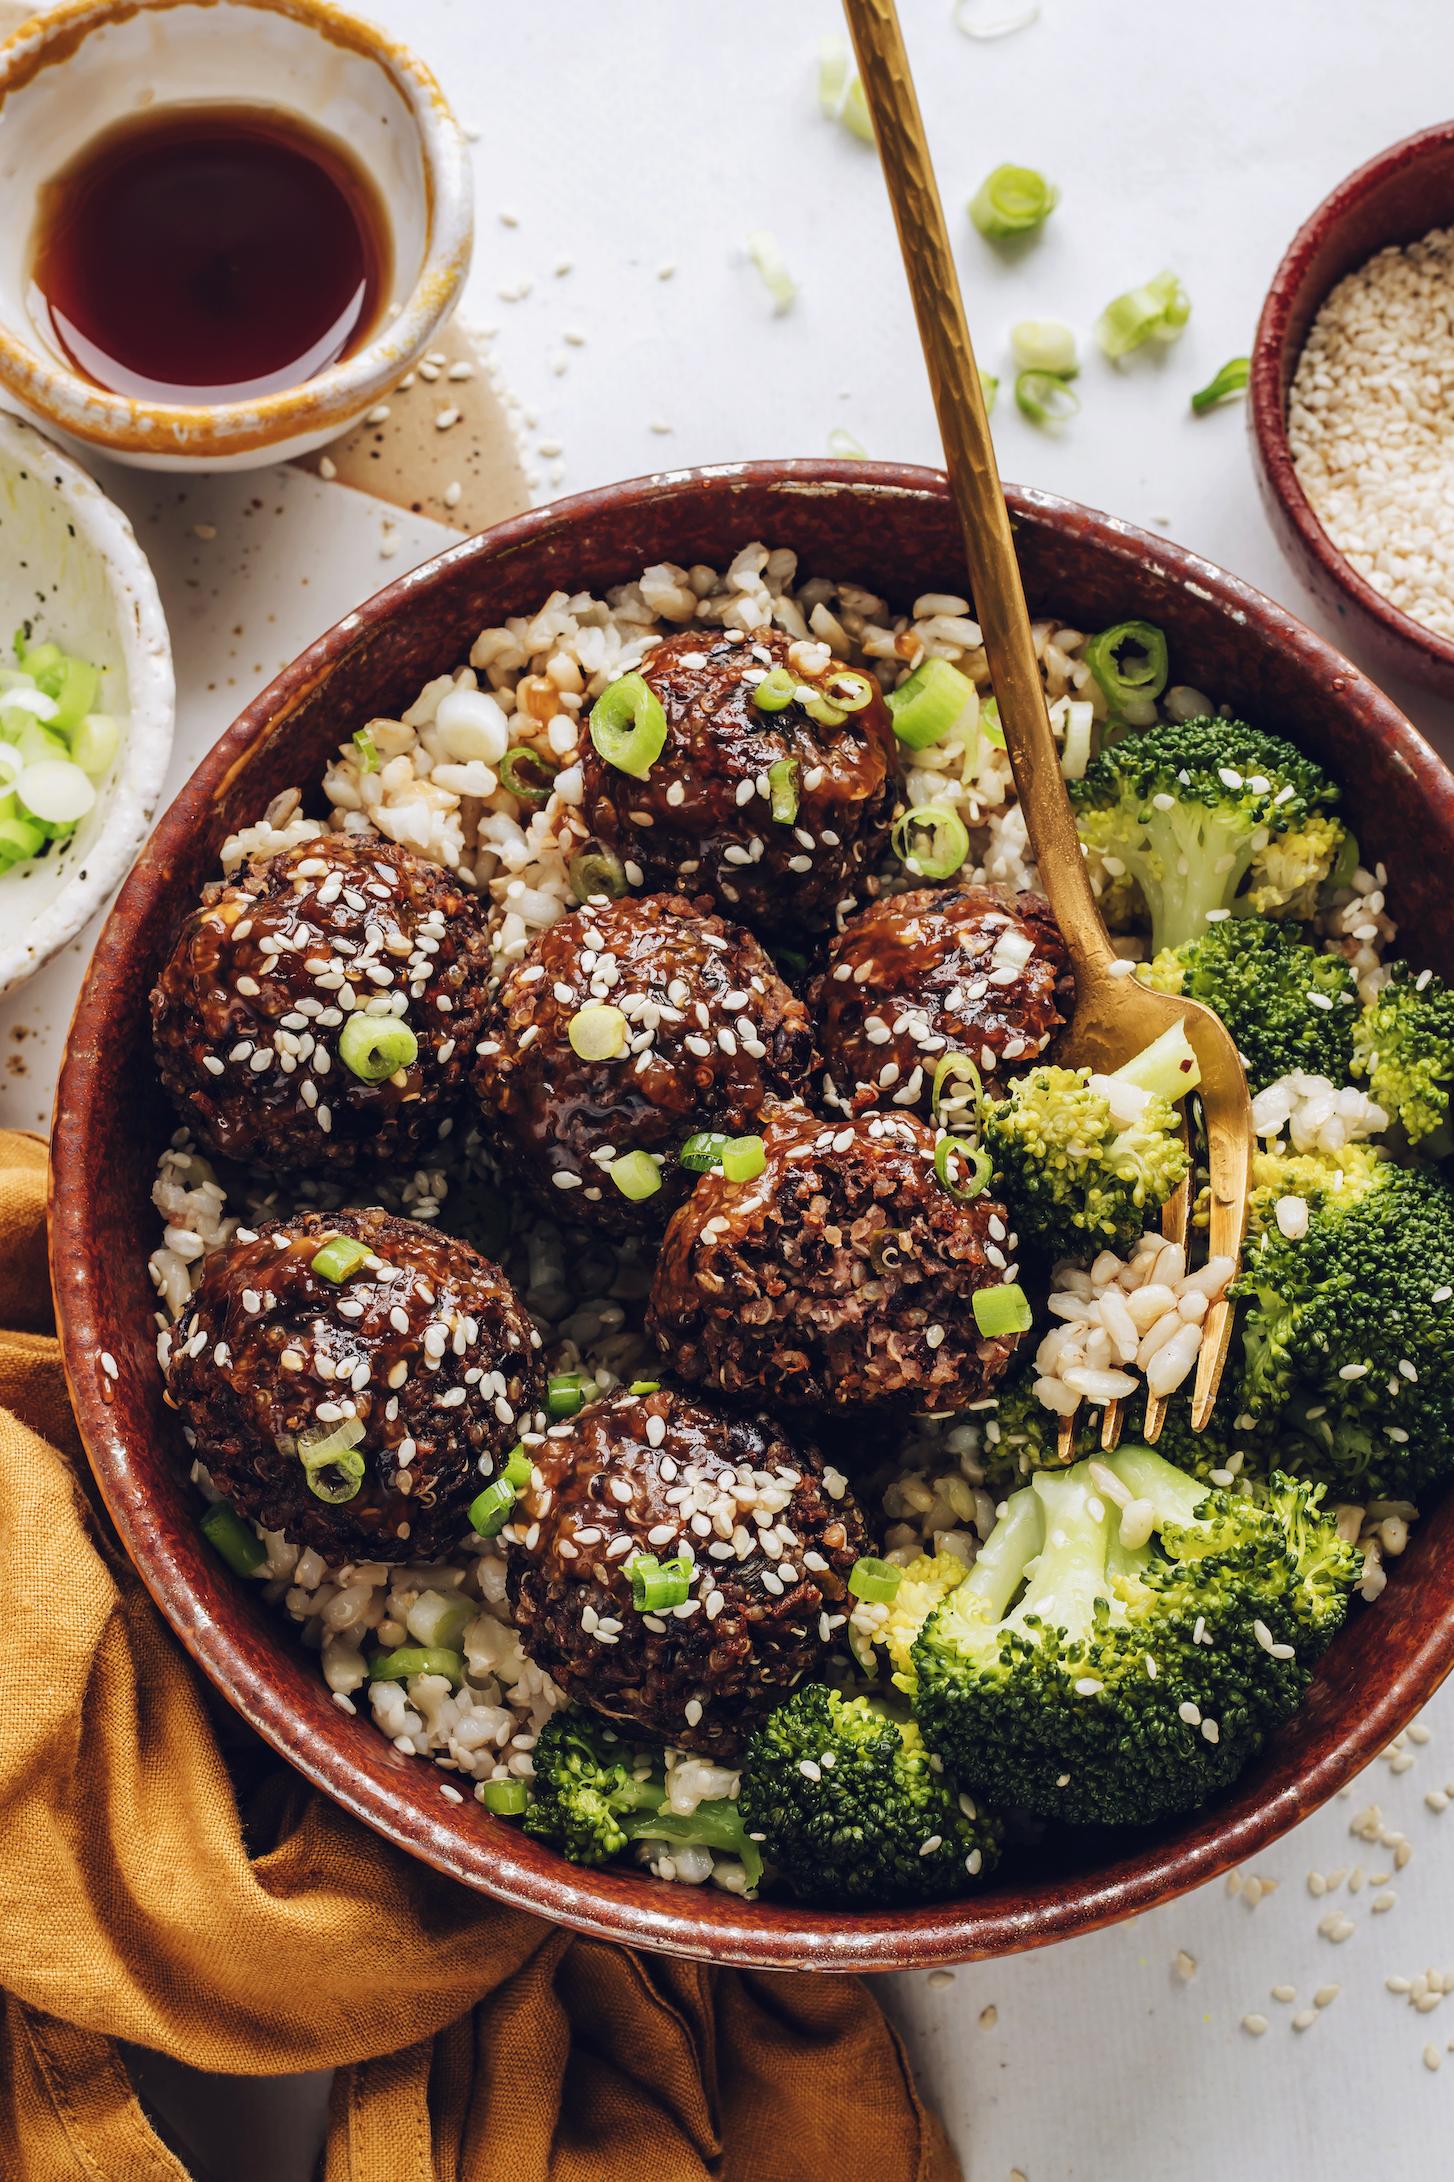  These gluten-free meatballs are packed with flavor and nutrition.